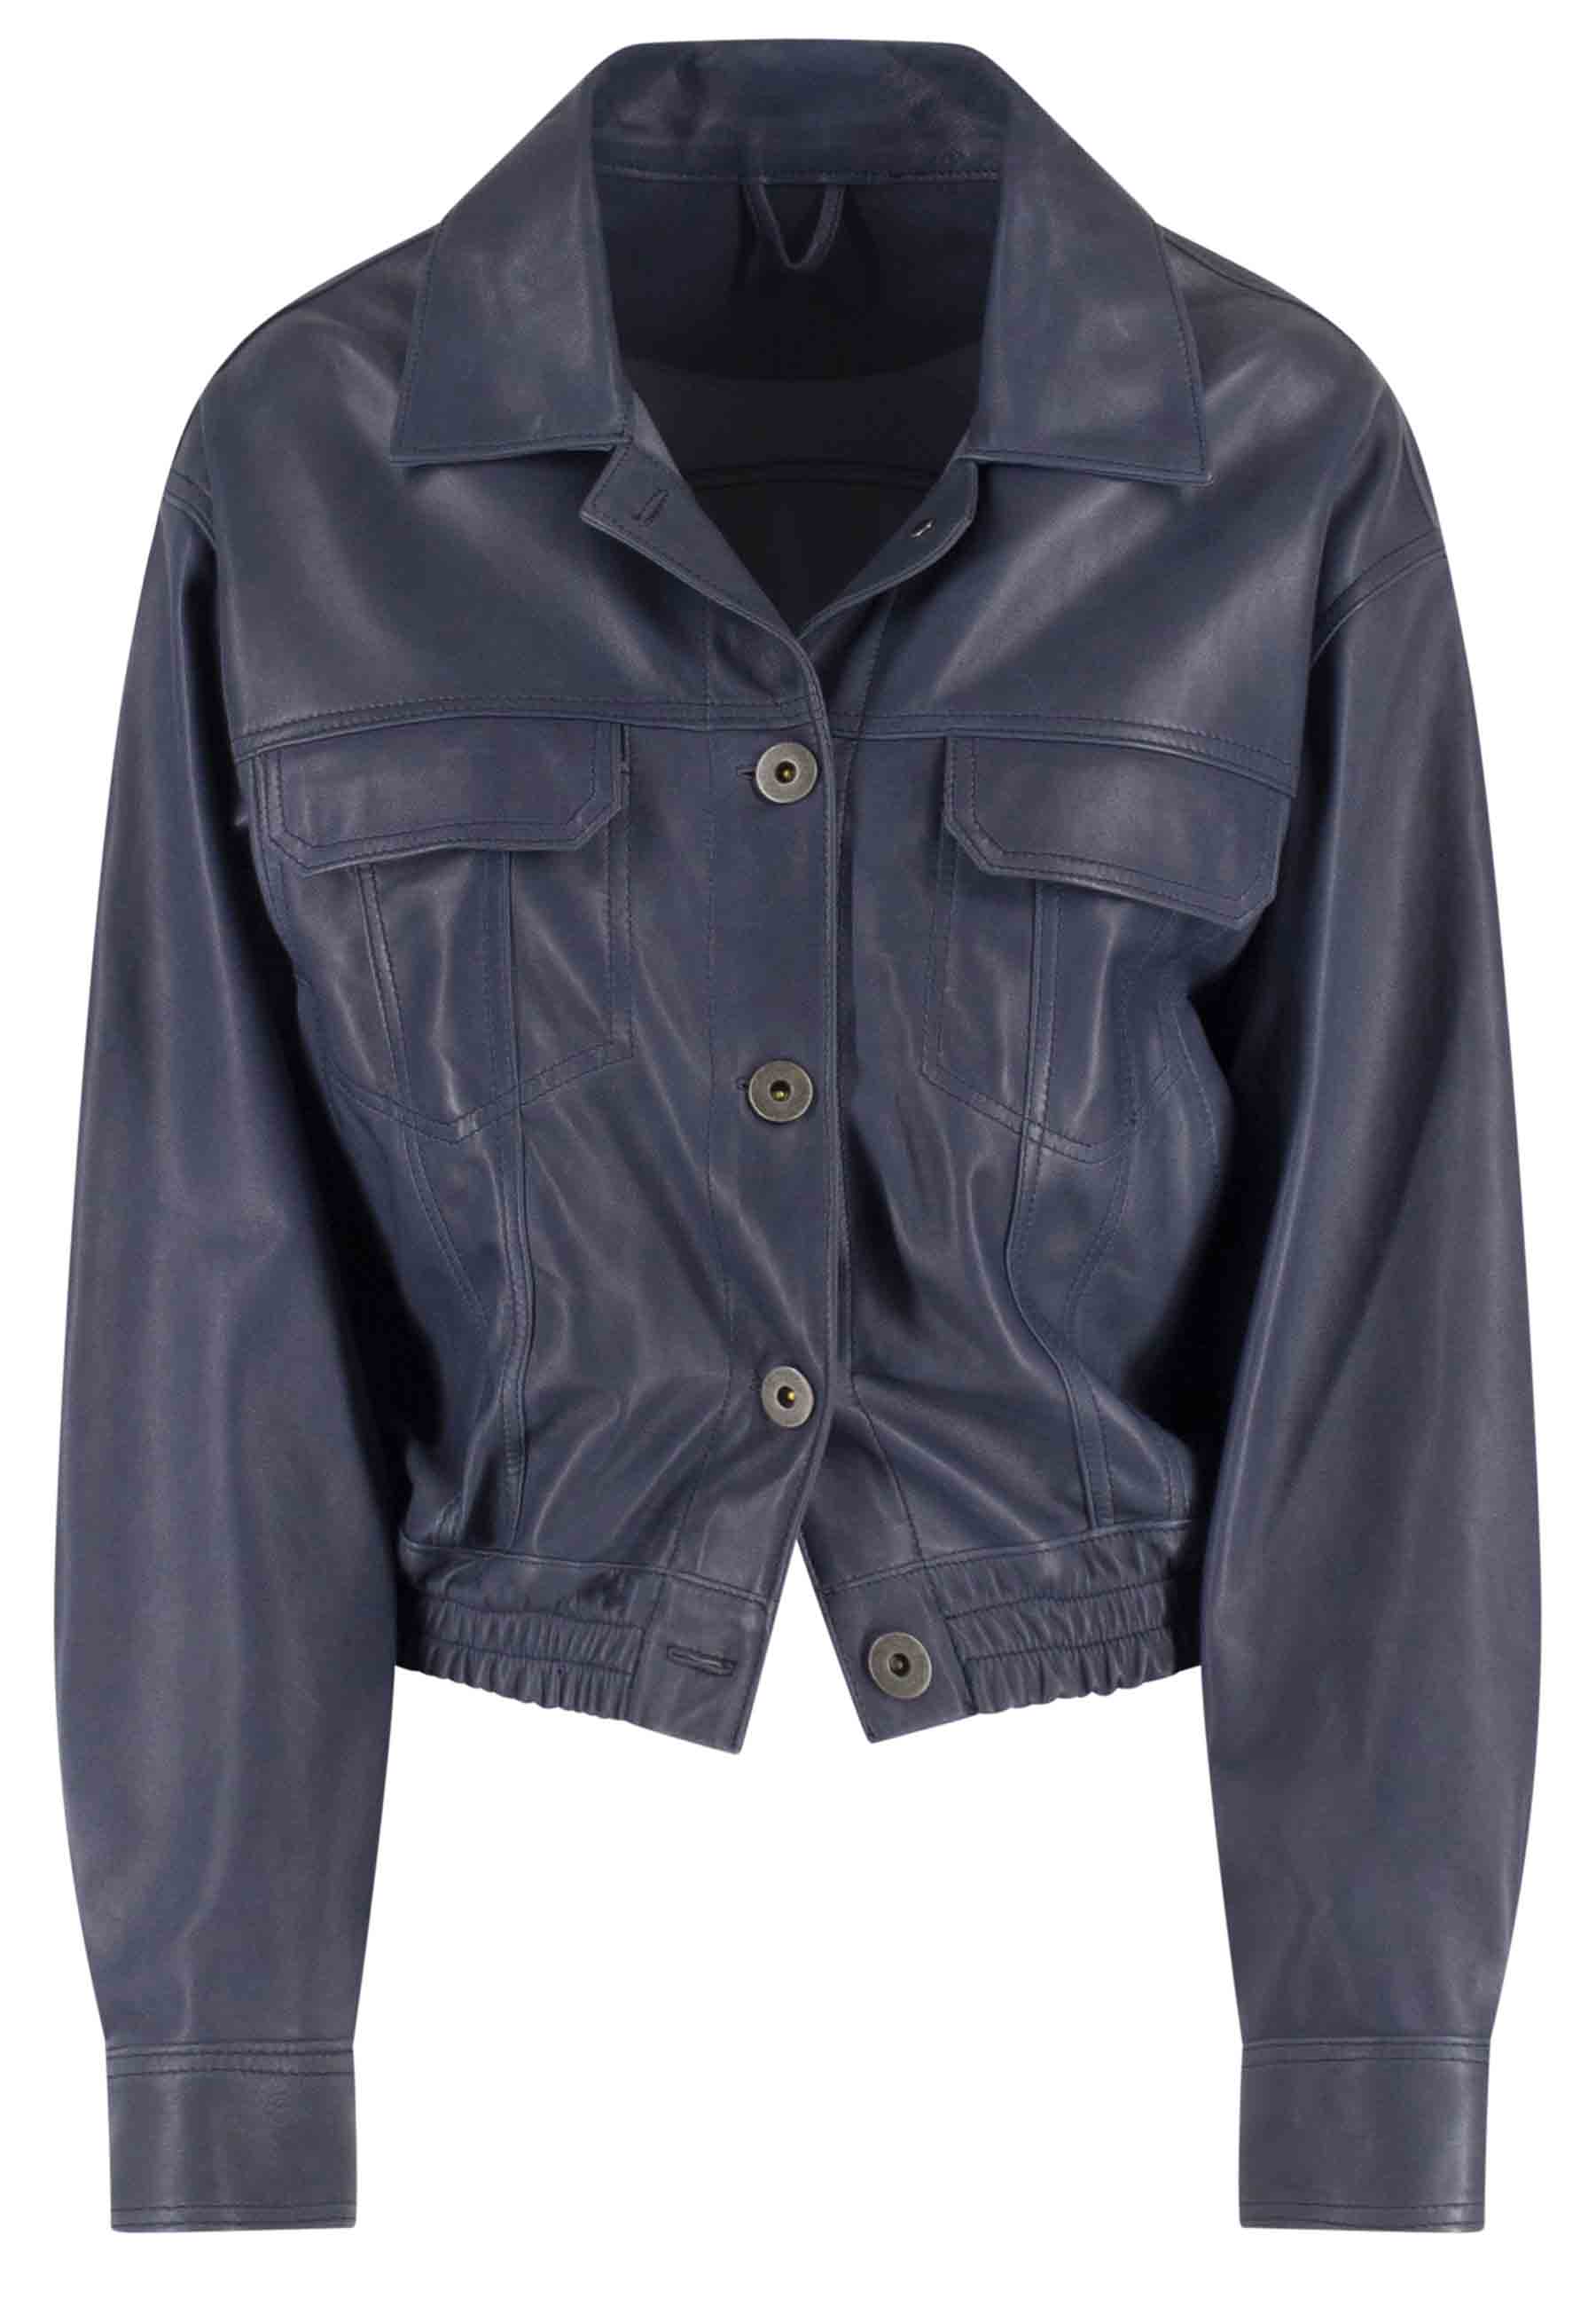 Women's short bomber jacket in unlined blue leather with elastic at the bottom